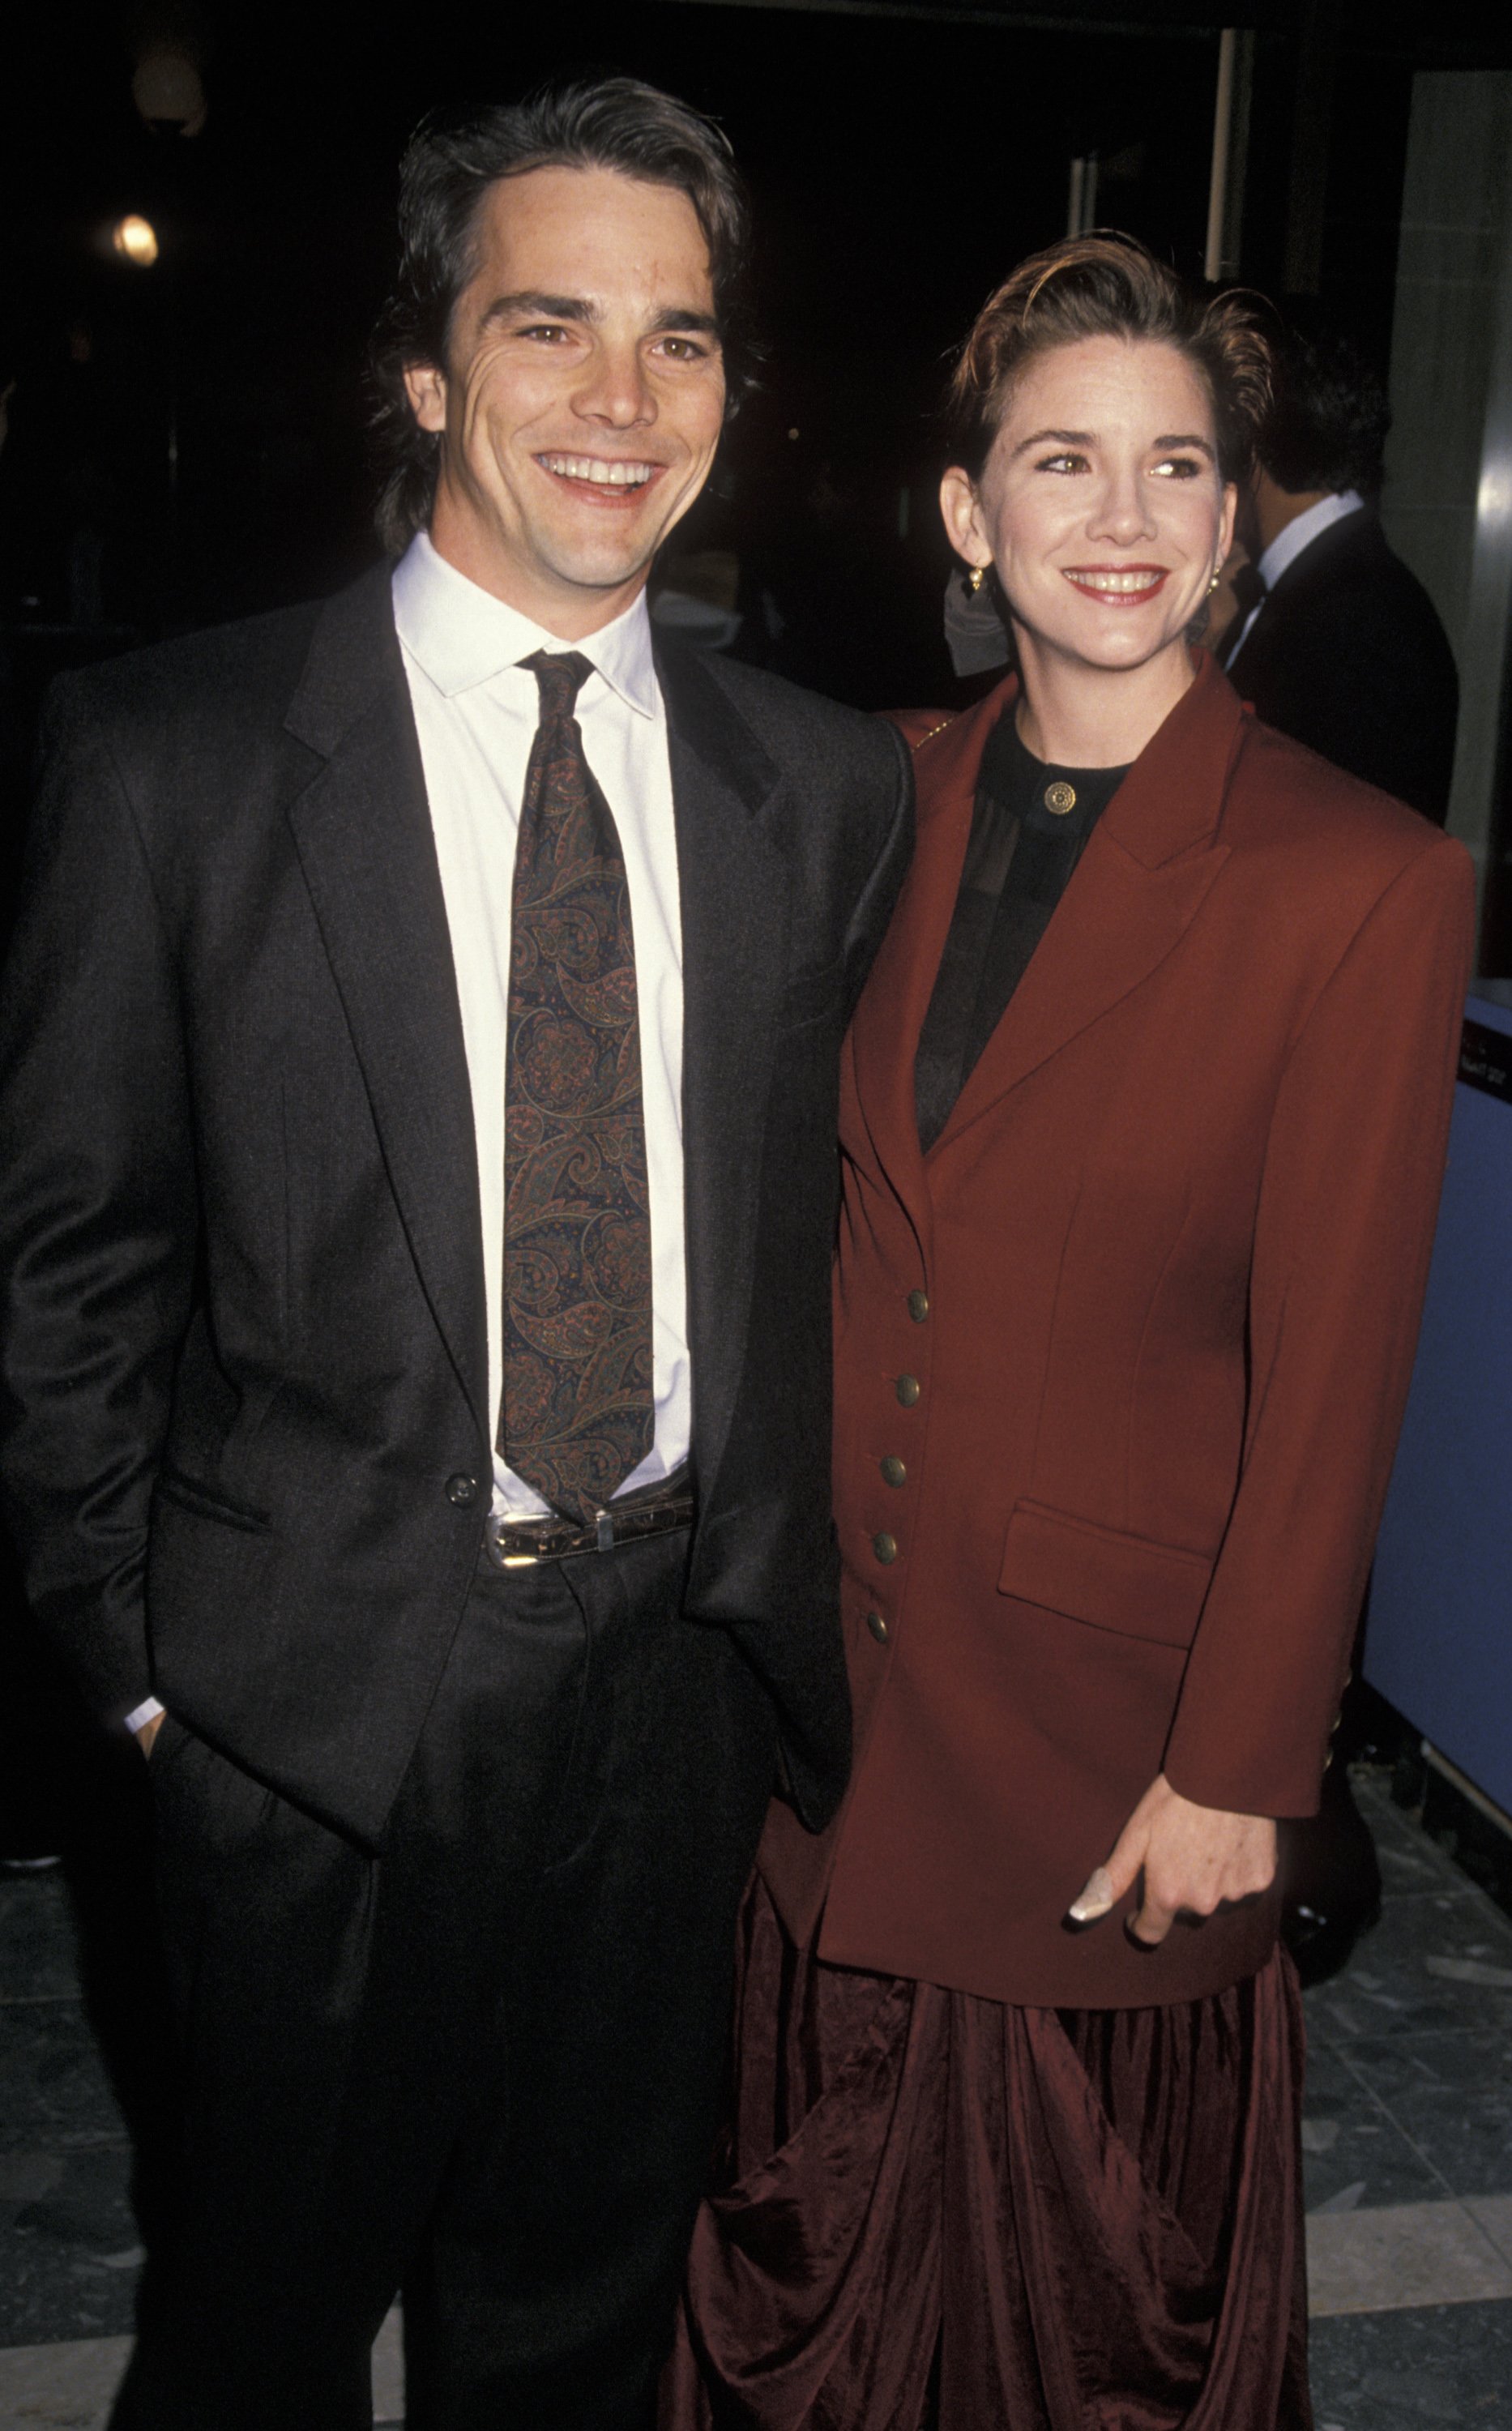 Bo Brinkman and Melissa Gilbert at the premiere of "Dances With Wolves" | Source: Getty Images